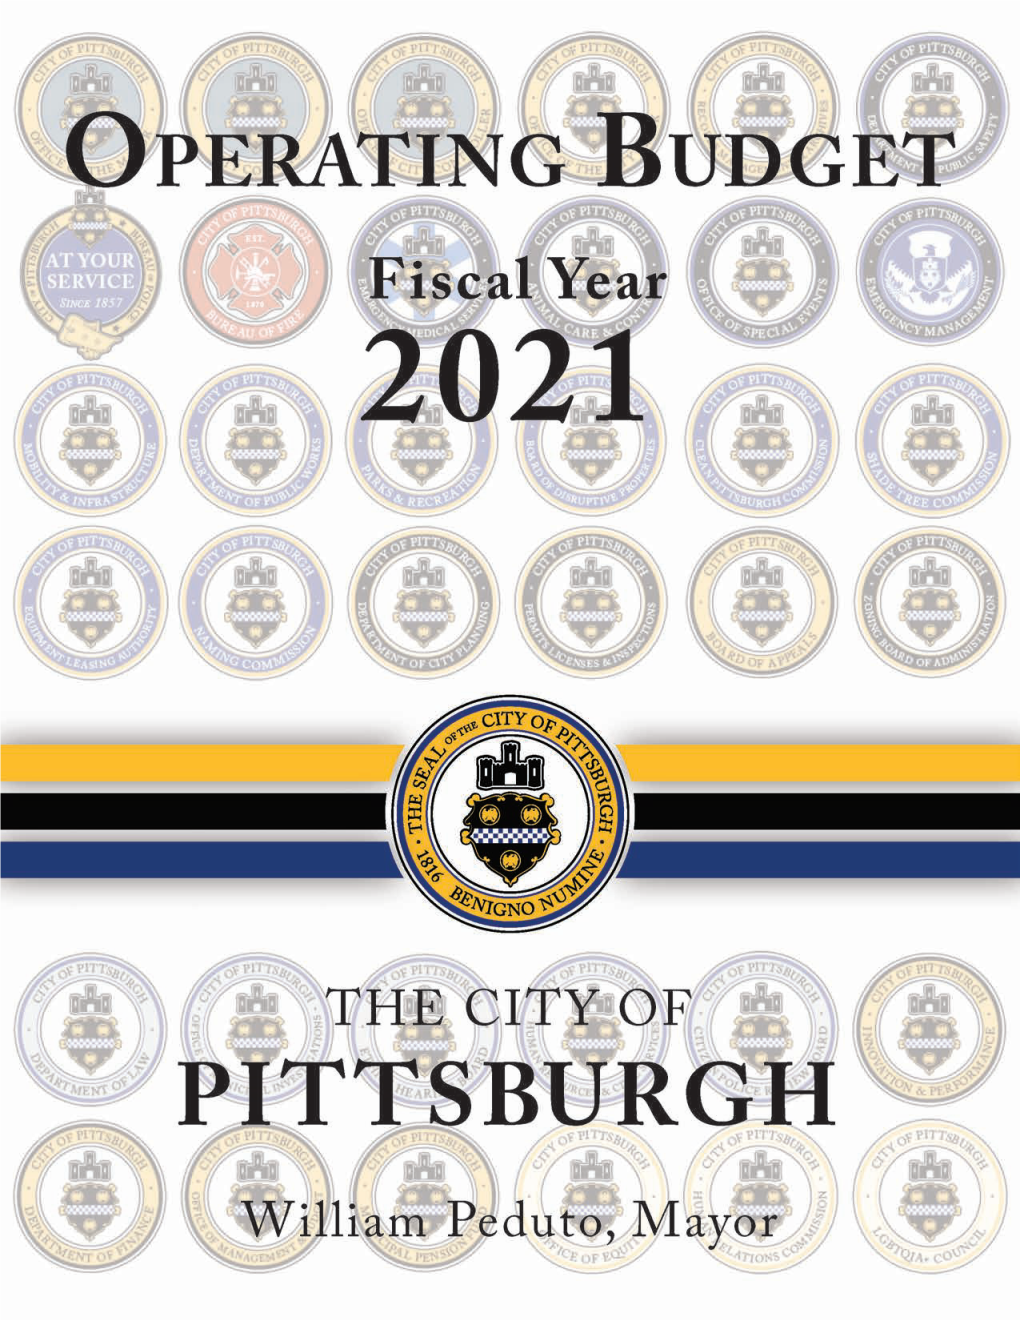 Document and Information Resource to Council, All City Departments, and the Residents of the City of Pittsburgh